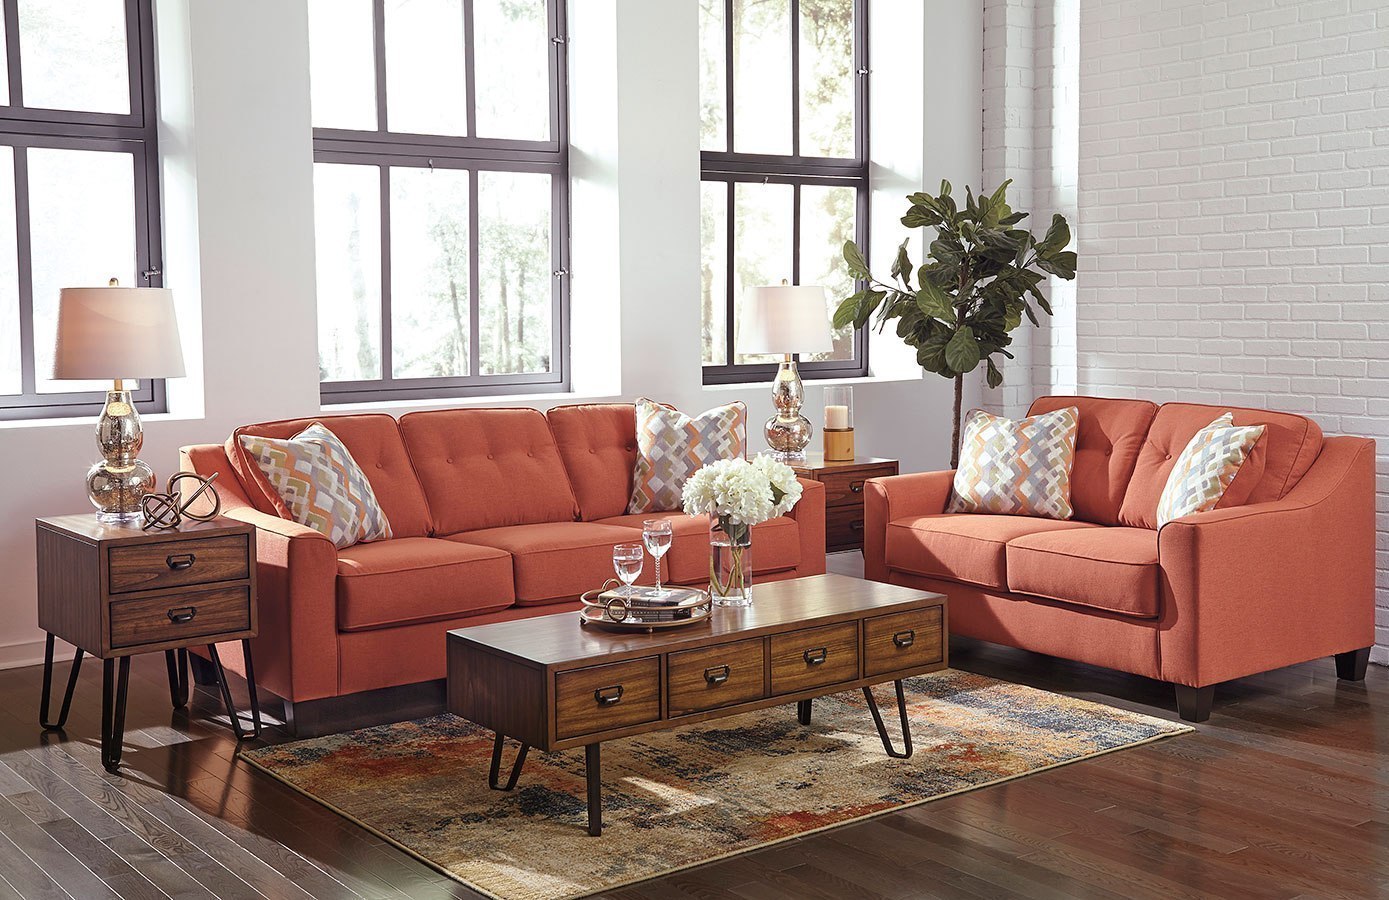 rust colored living room